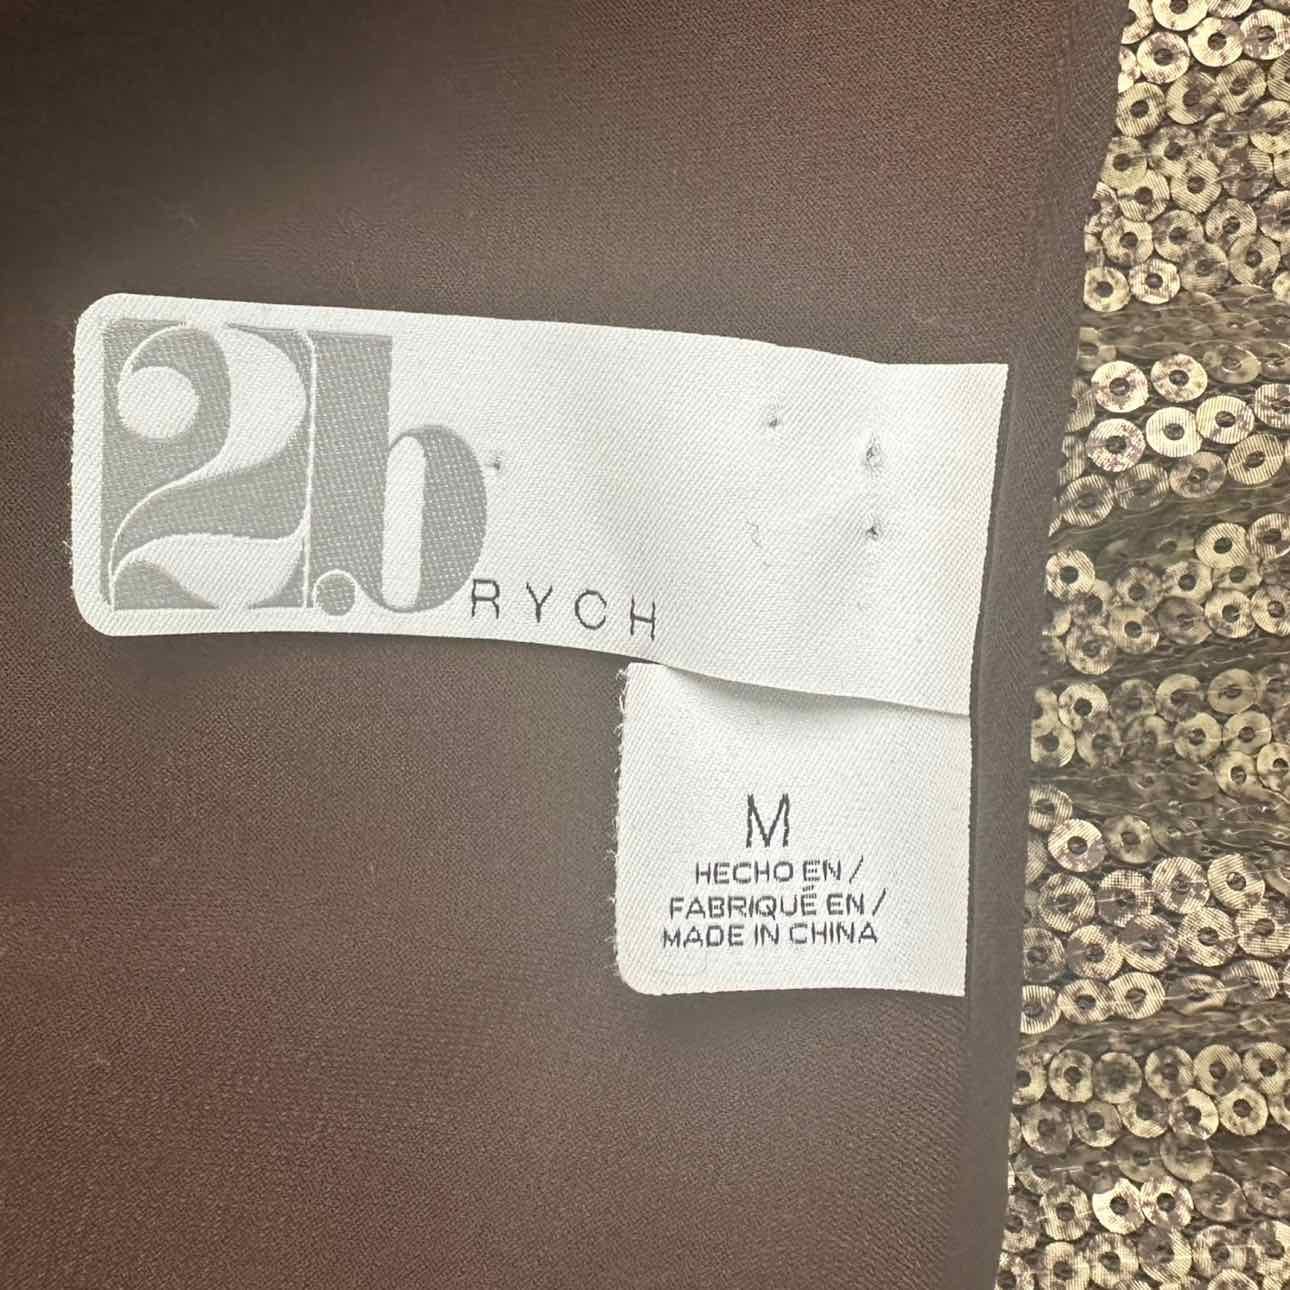 2Brych NWT Metallic Bronze Sequin Top, brand tag